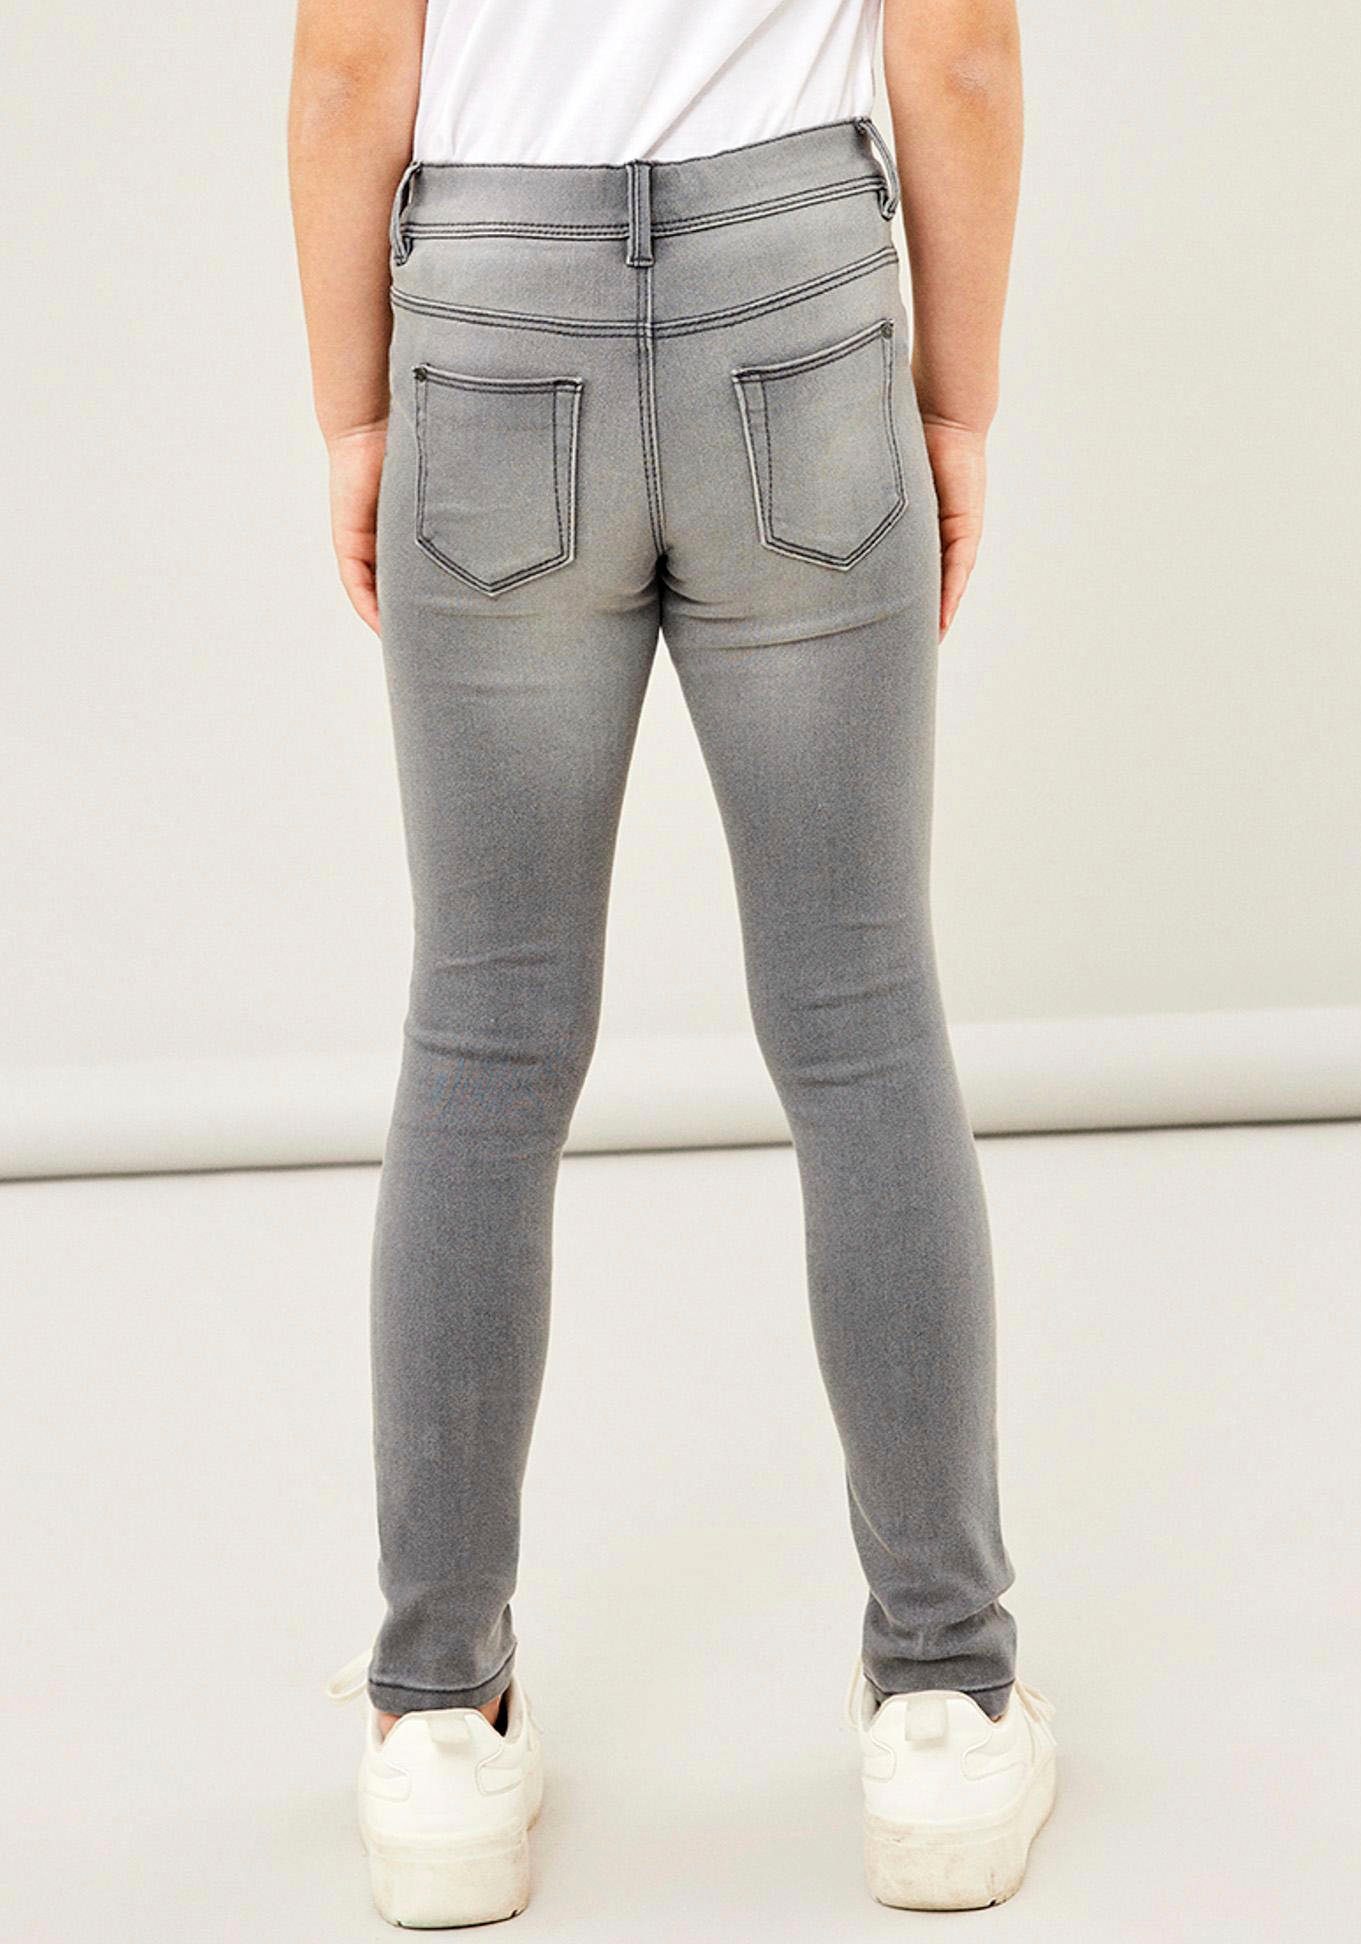 It NKFPOLLY grey PANT DNMTAX Stretch-Jeans denim Name light